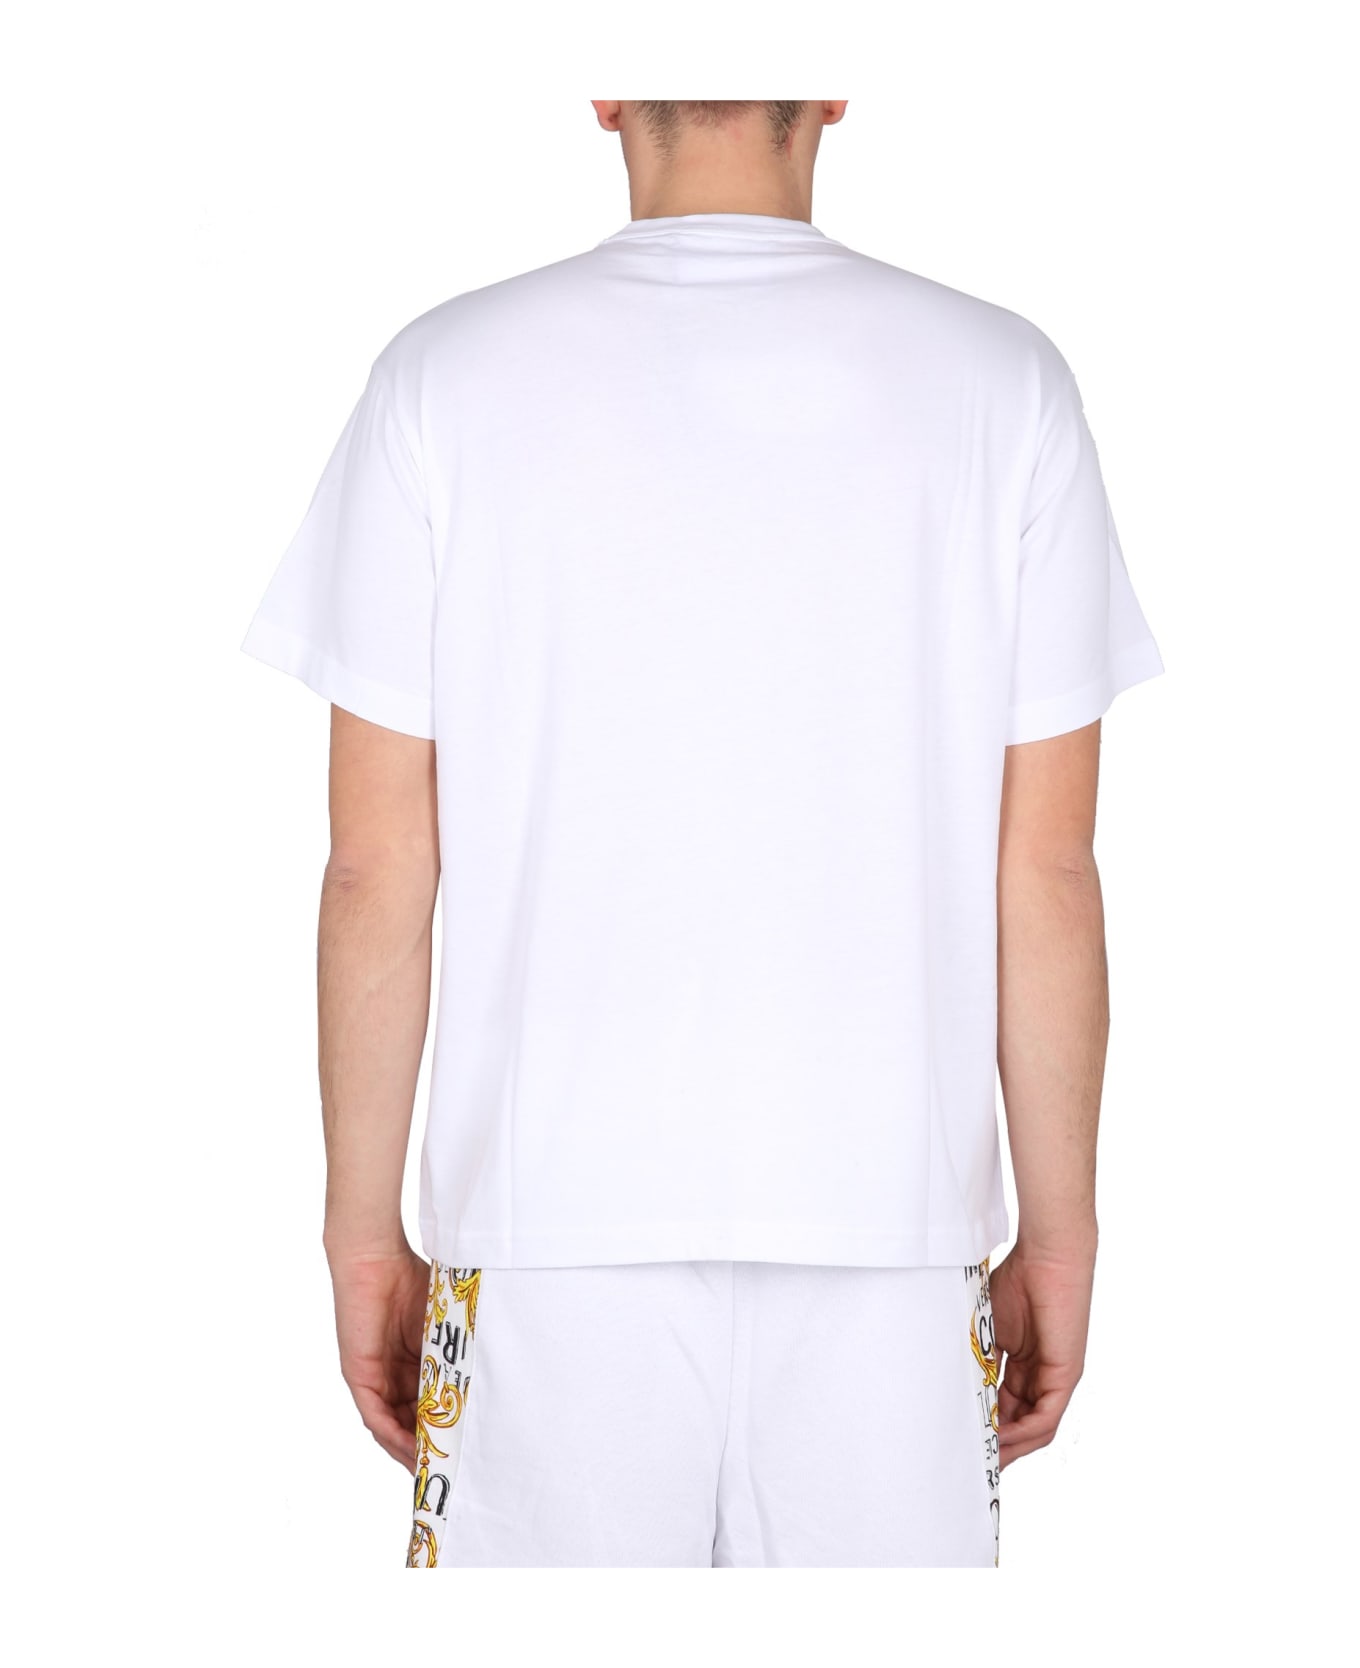 Versace Jeans Couture T-shirt - White シャツ